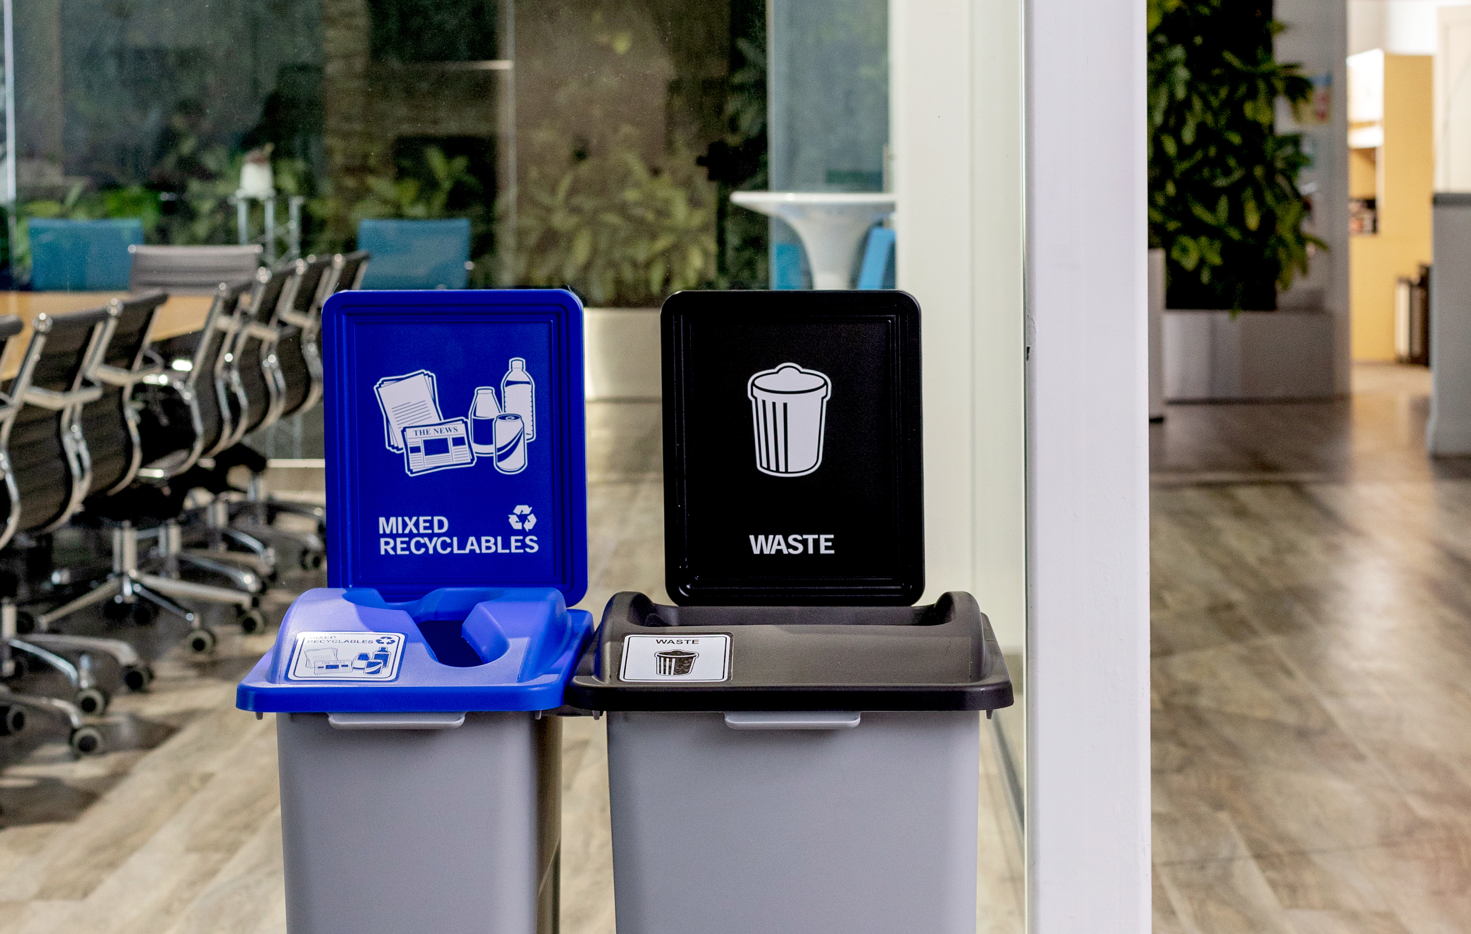 Recycling and waste containers in an office